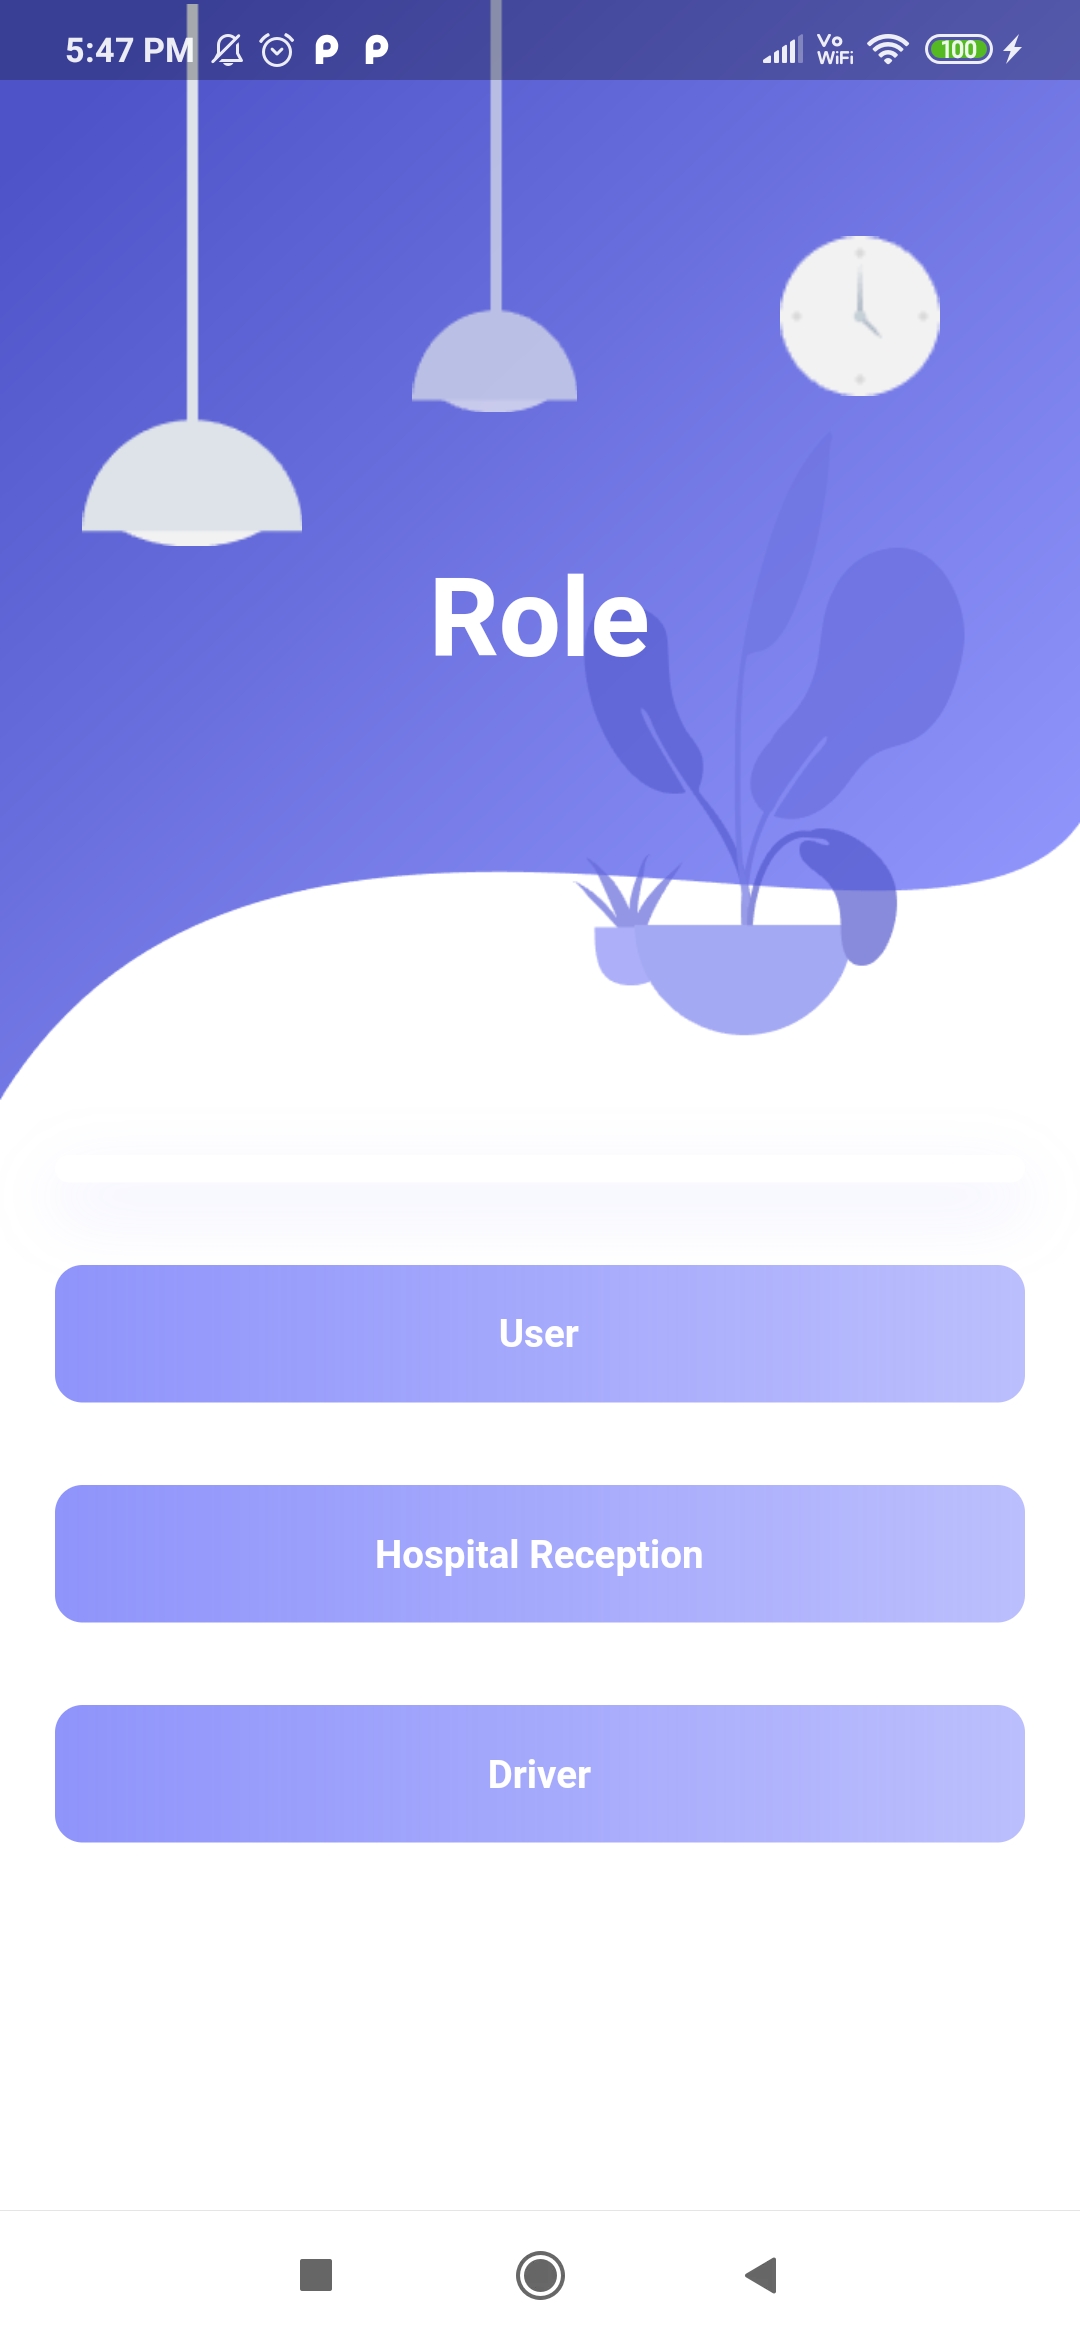 A Flutter application that notifies patients of nearby hospitals